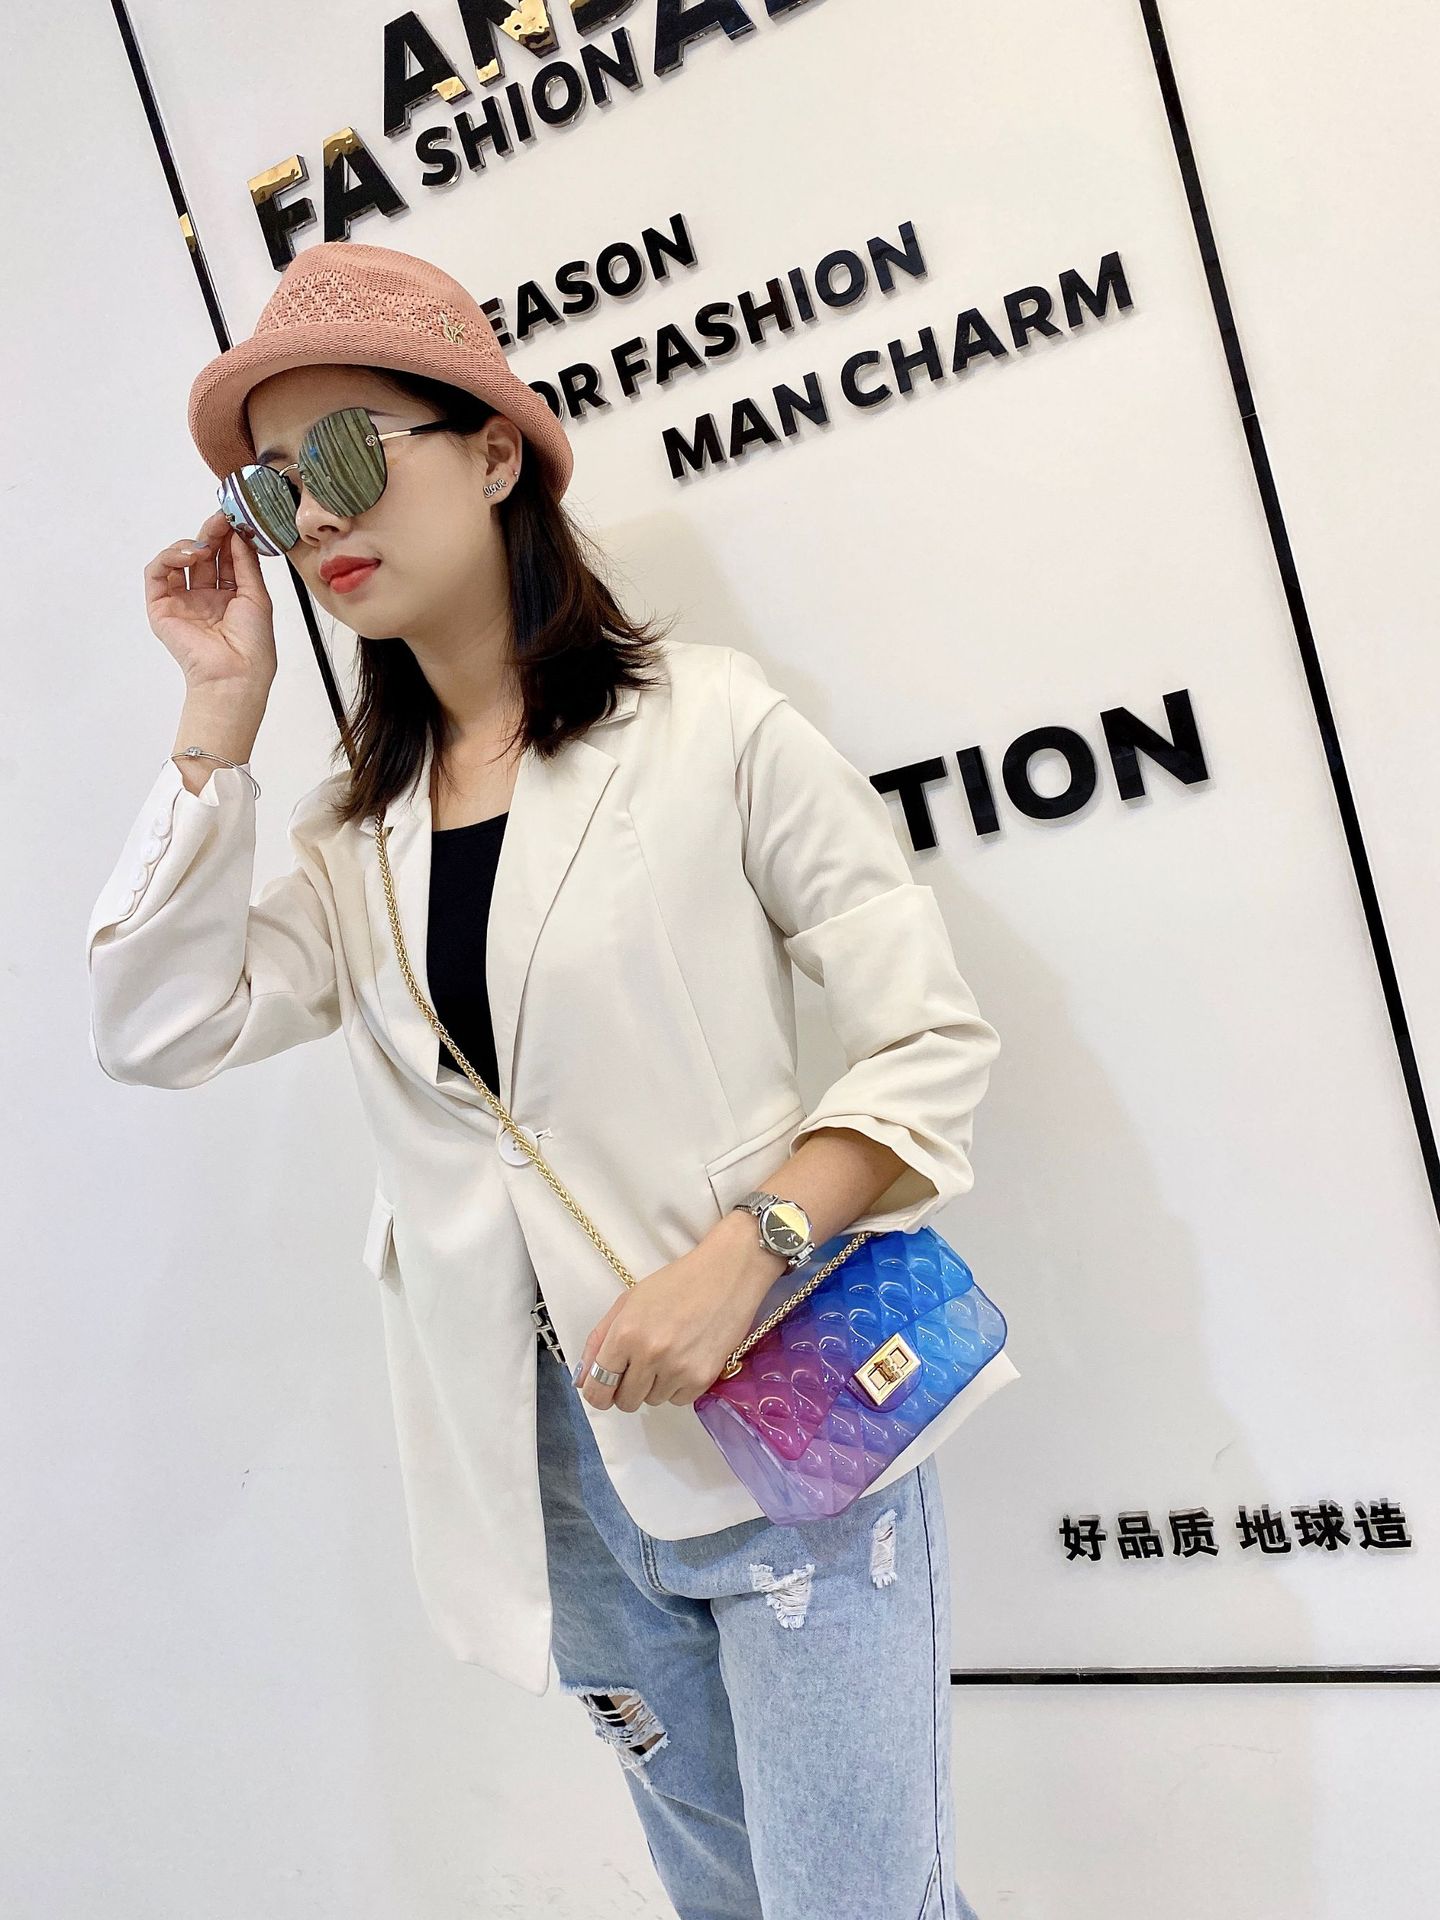 Summer 2020 hot style small fragrance wind single shoulder cross-body transparent leisure beach linger mini jelly bag lady